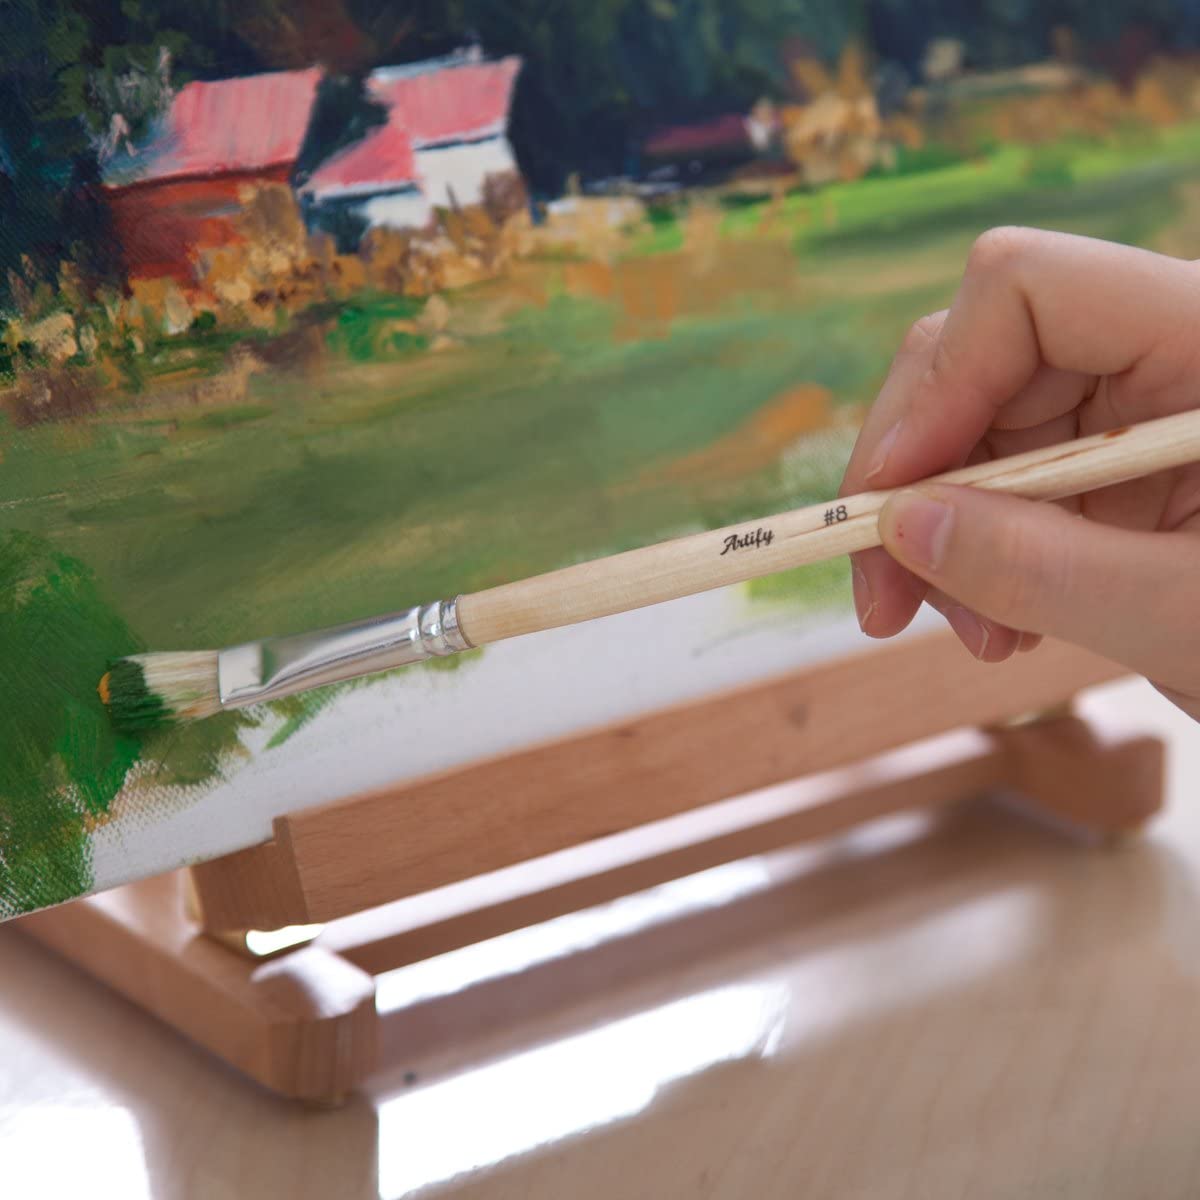 Artify Expert Paint Brushes Art Set in action